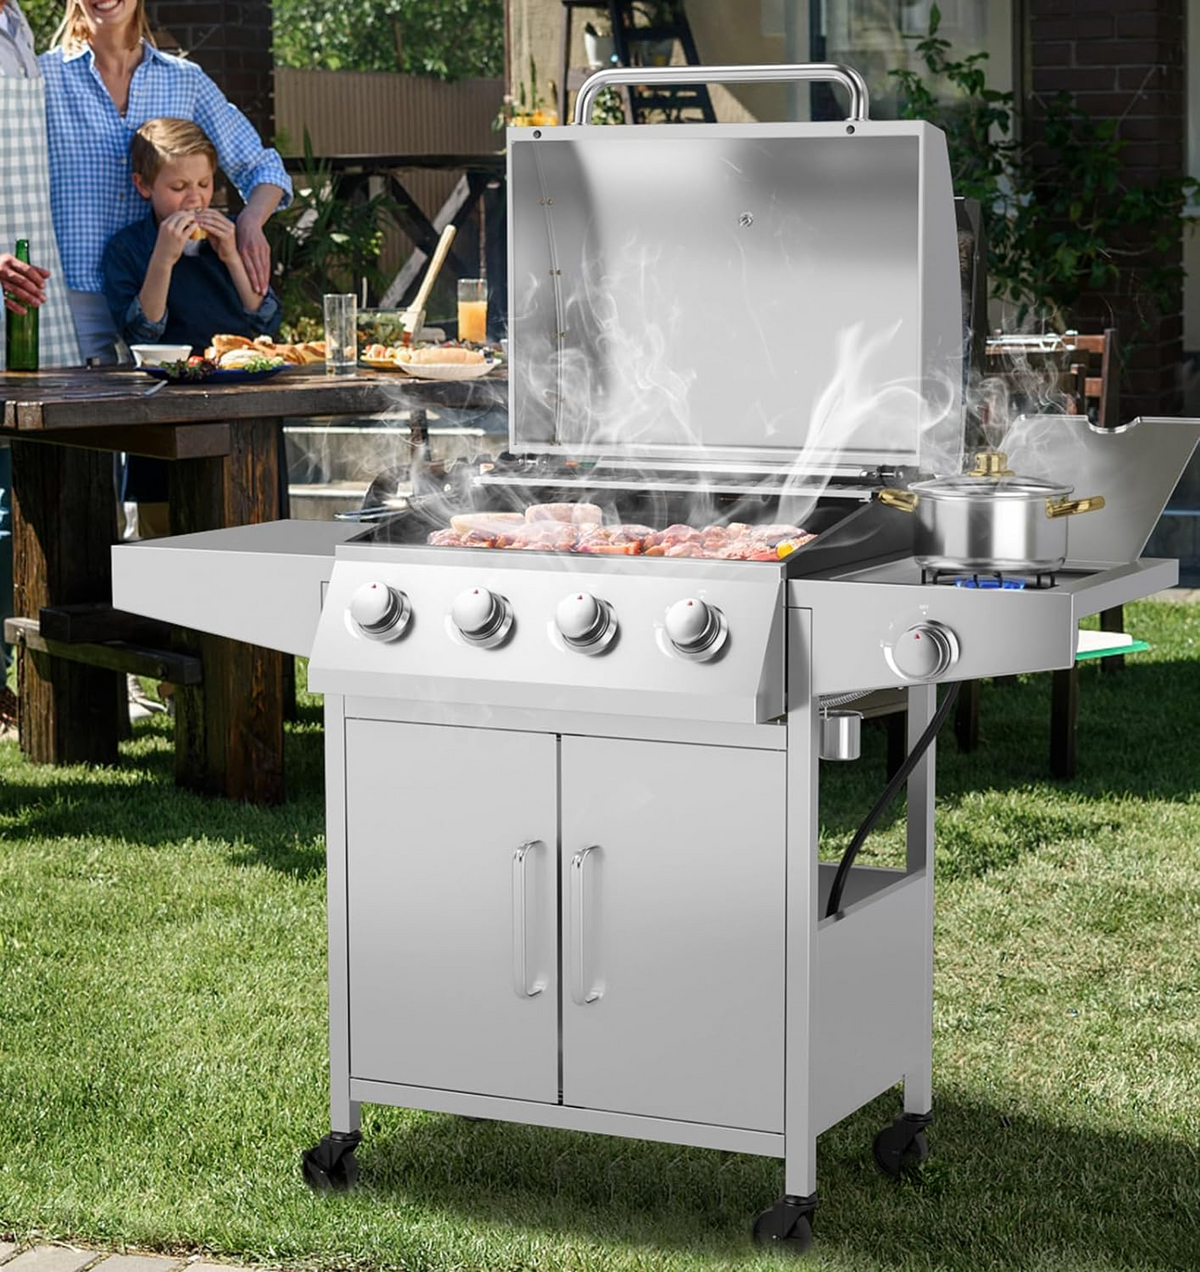 Giantex Propane Gas Grill 50,000 BTU, 4 Main Burners, 1 Side Burner, 2 Prep Tables, Stainless Steel Heavy-Duty BBQ Grill with 4 Wheels for Backyard Party Outdoor Cooking - Barbecue Whizz...Watch My Smoke!